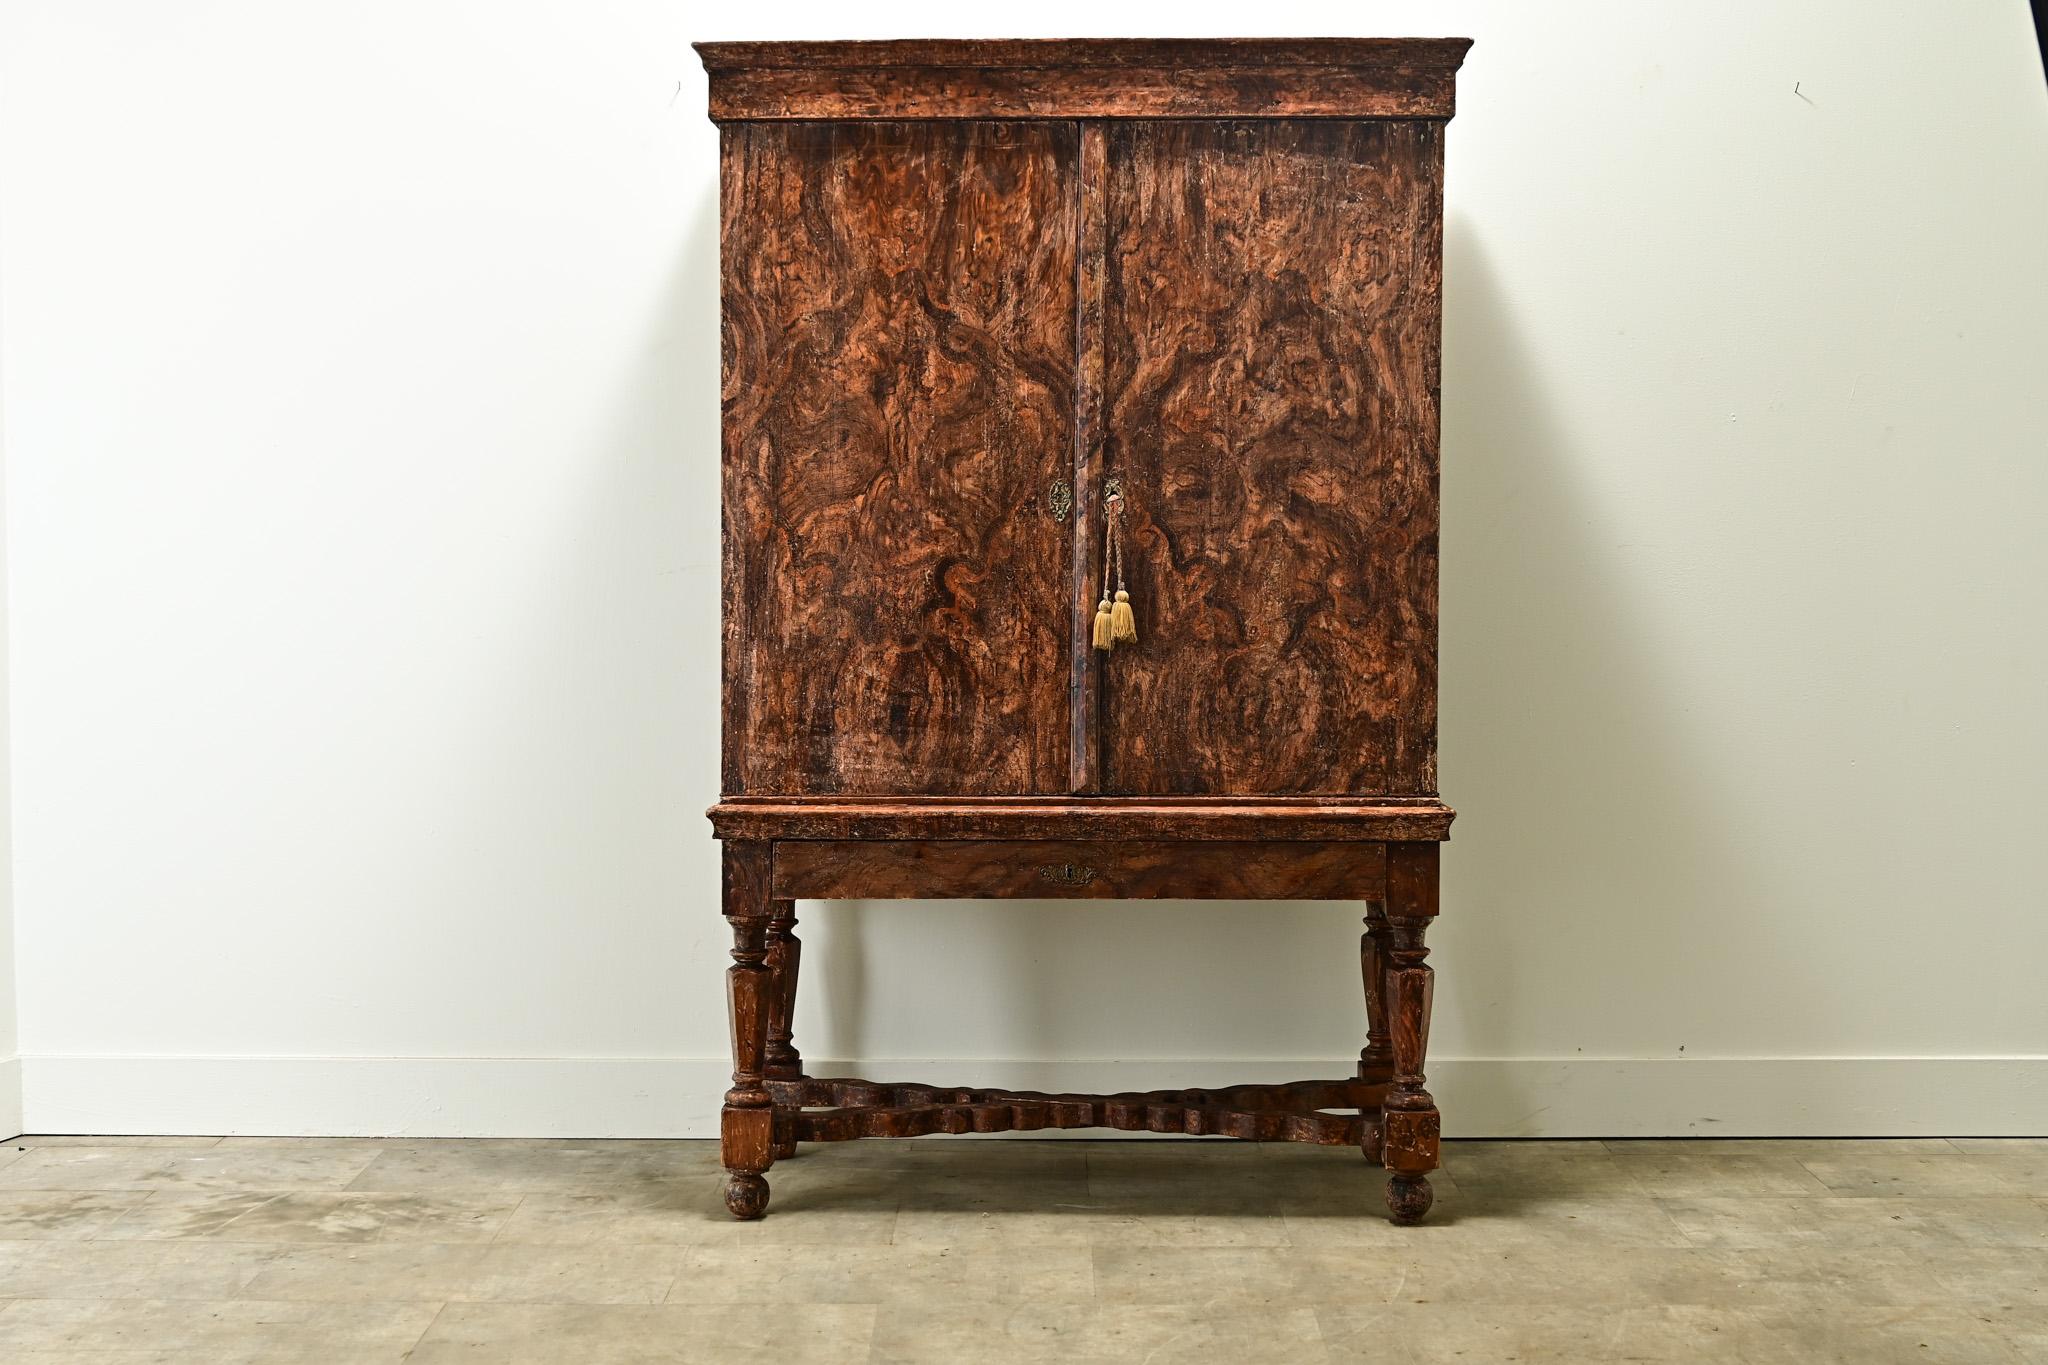 This Swedish Gustavian faux bois cabinet was made in the 1600’s and makes a statement. This sturdy solid pine cabinet has a faux bois paint finish that has been hand-scraped back to its original finish. The pair of cabinet doors open with a working